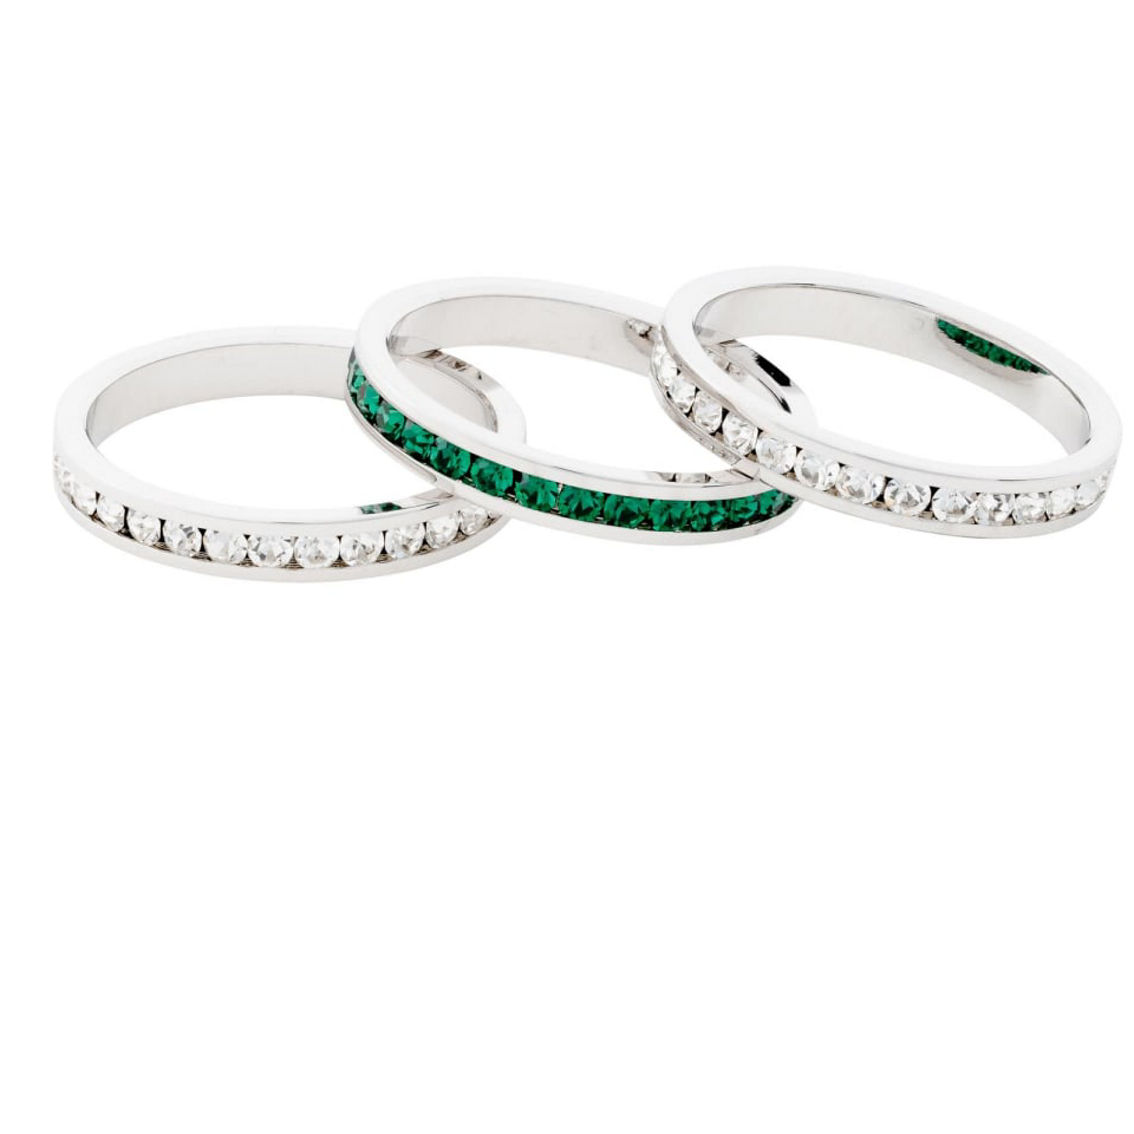 Sterling Silver Crystal Birthstone Eternity Ring Set - Image 2 of 2